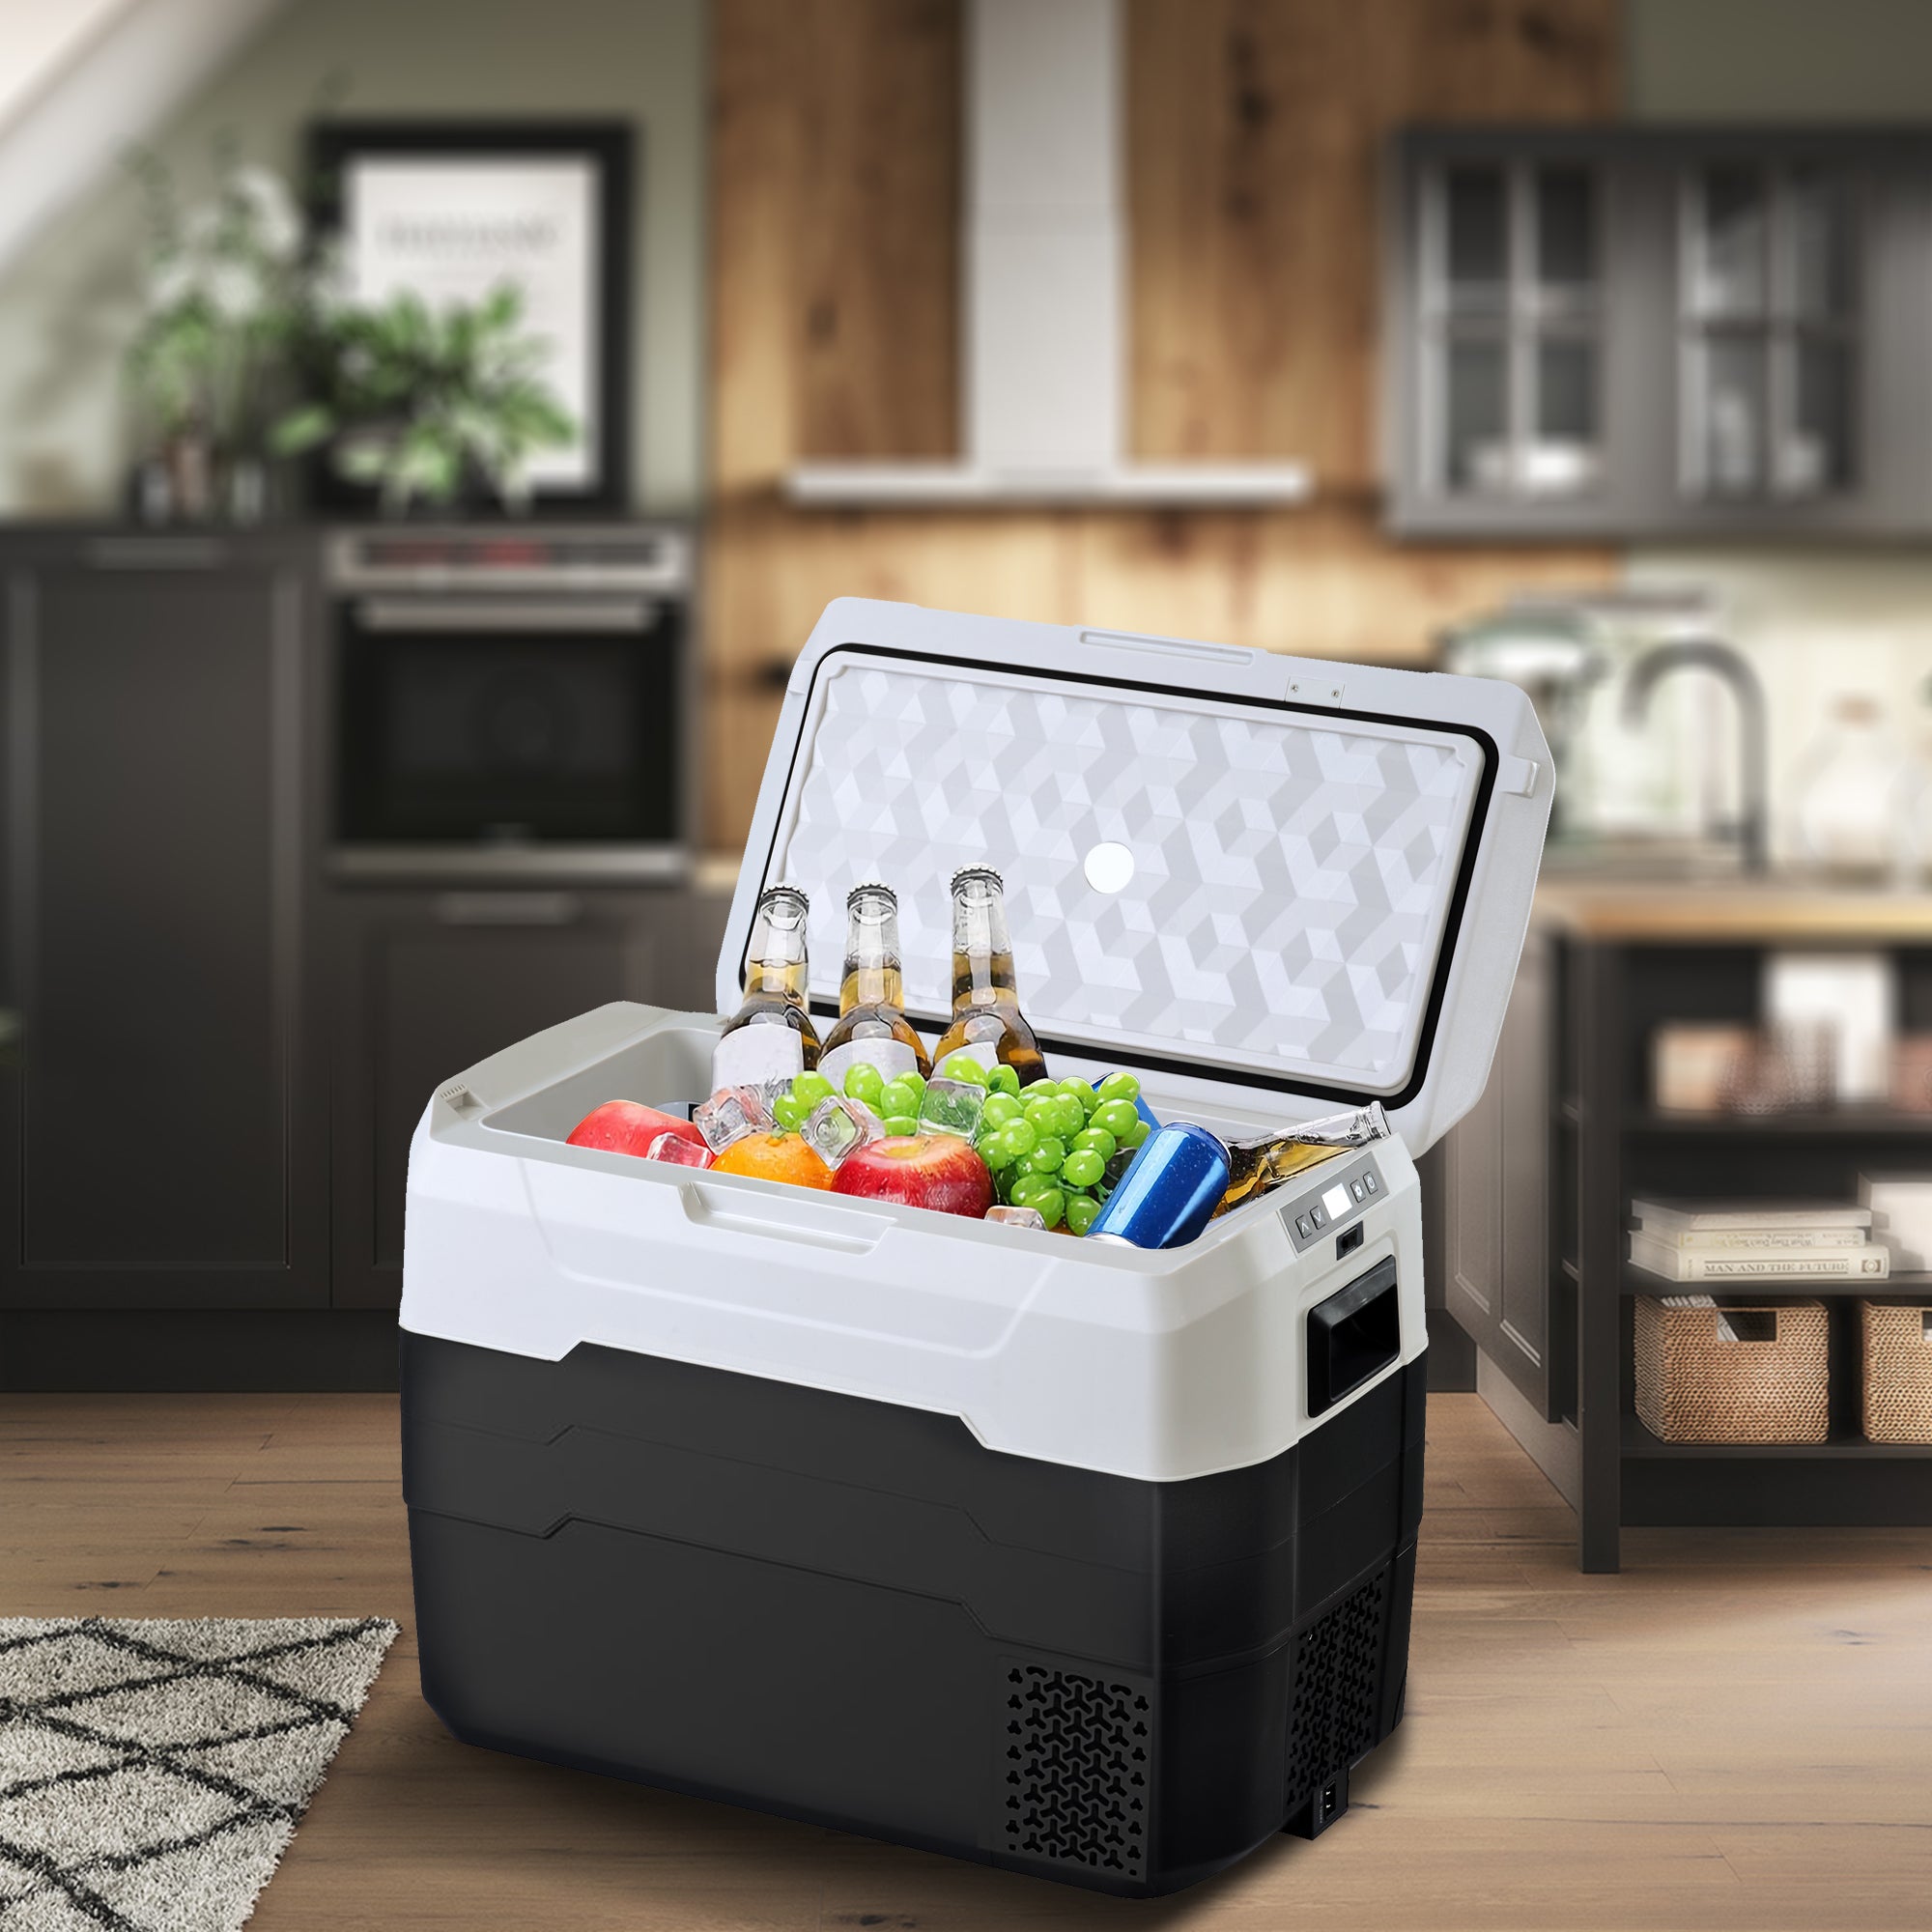 Car Fridge Portable Freezer Cooler with 12/24V DC, Travel Refrigerator for Vehicles, Car, Truck, RV, Camping BBQ, Patio Picnic and Fishing Outdoor